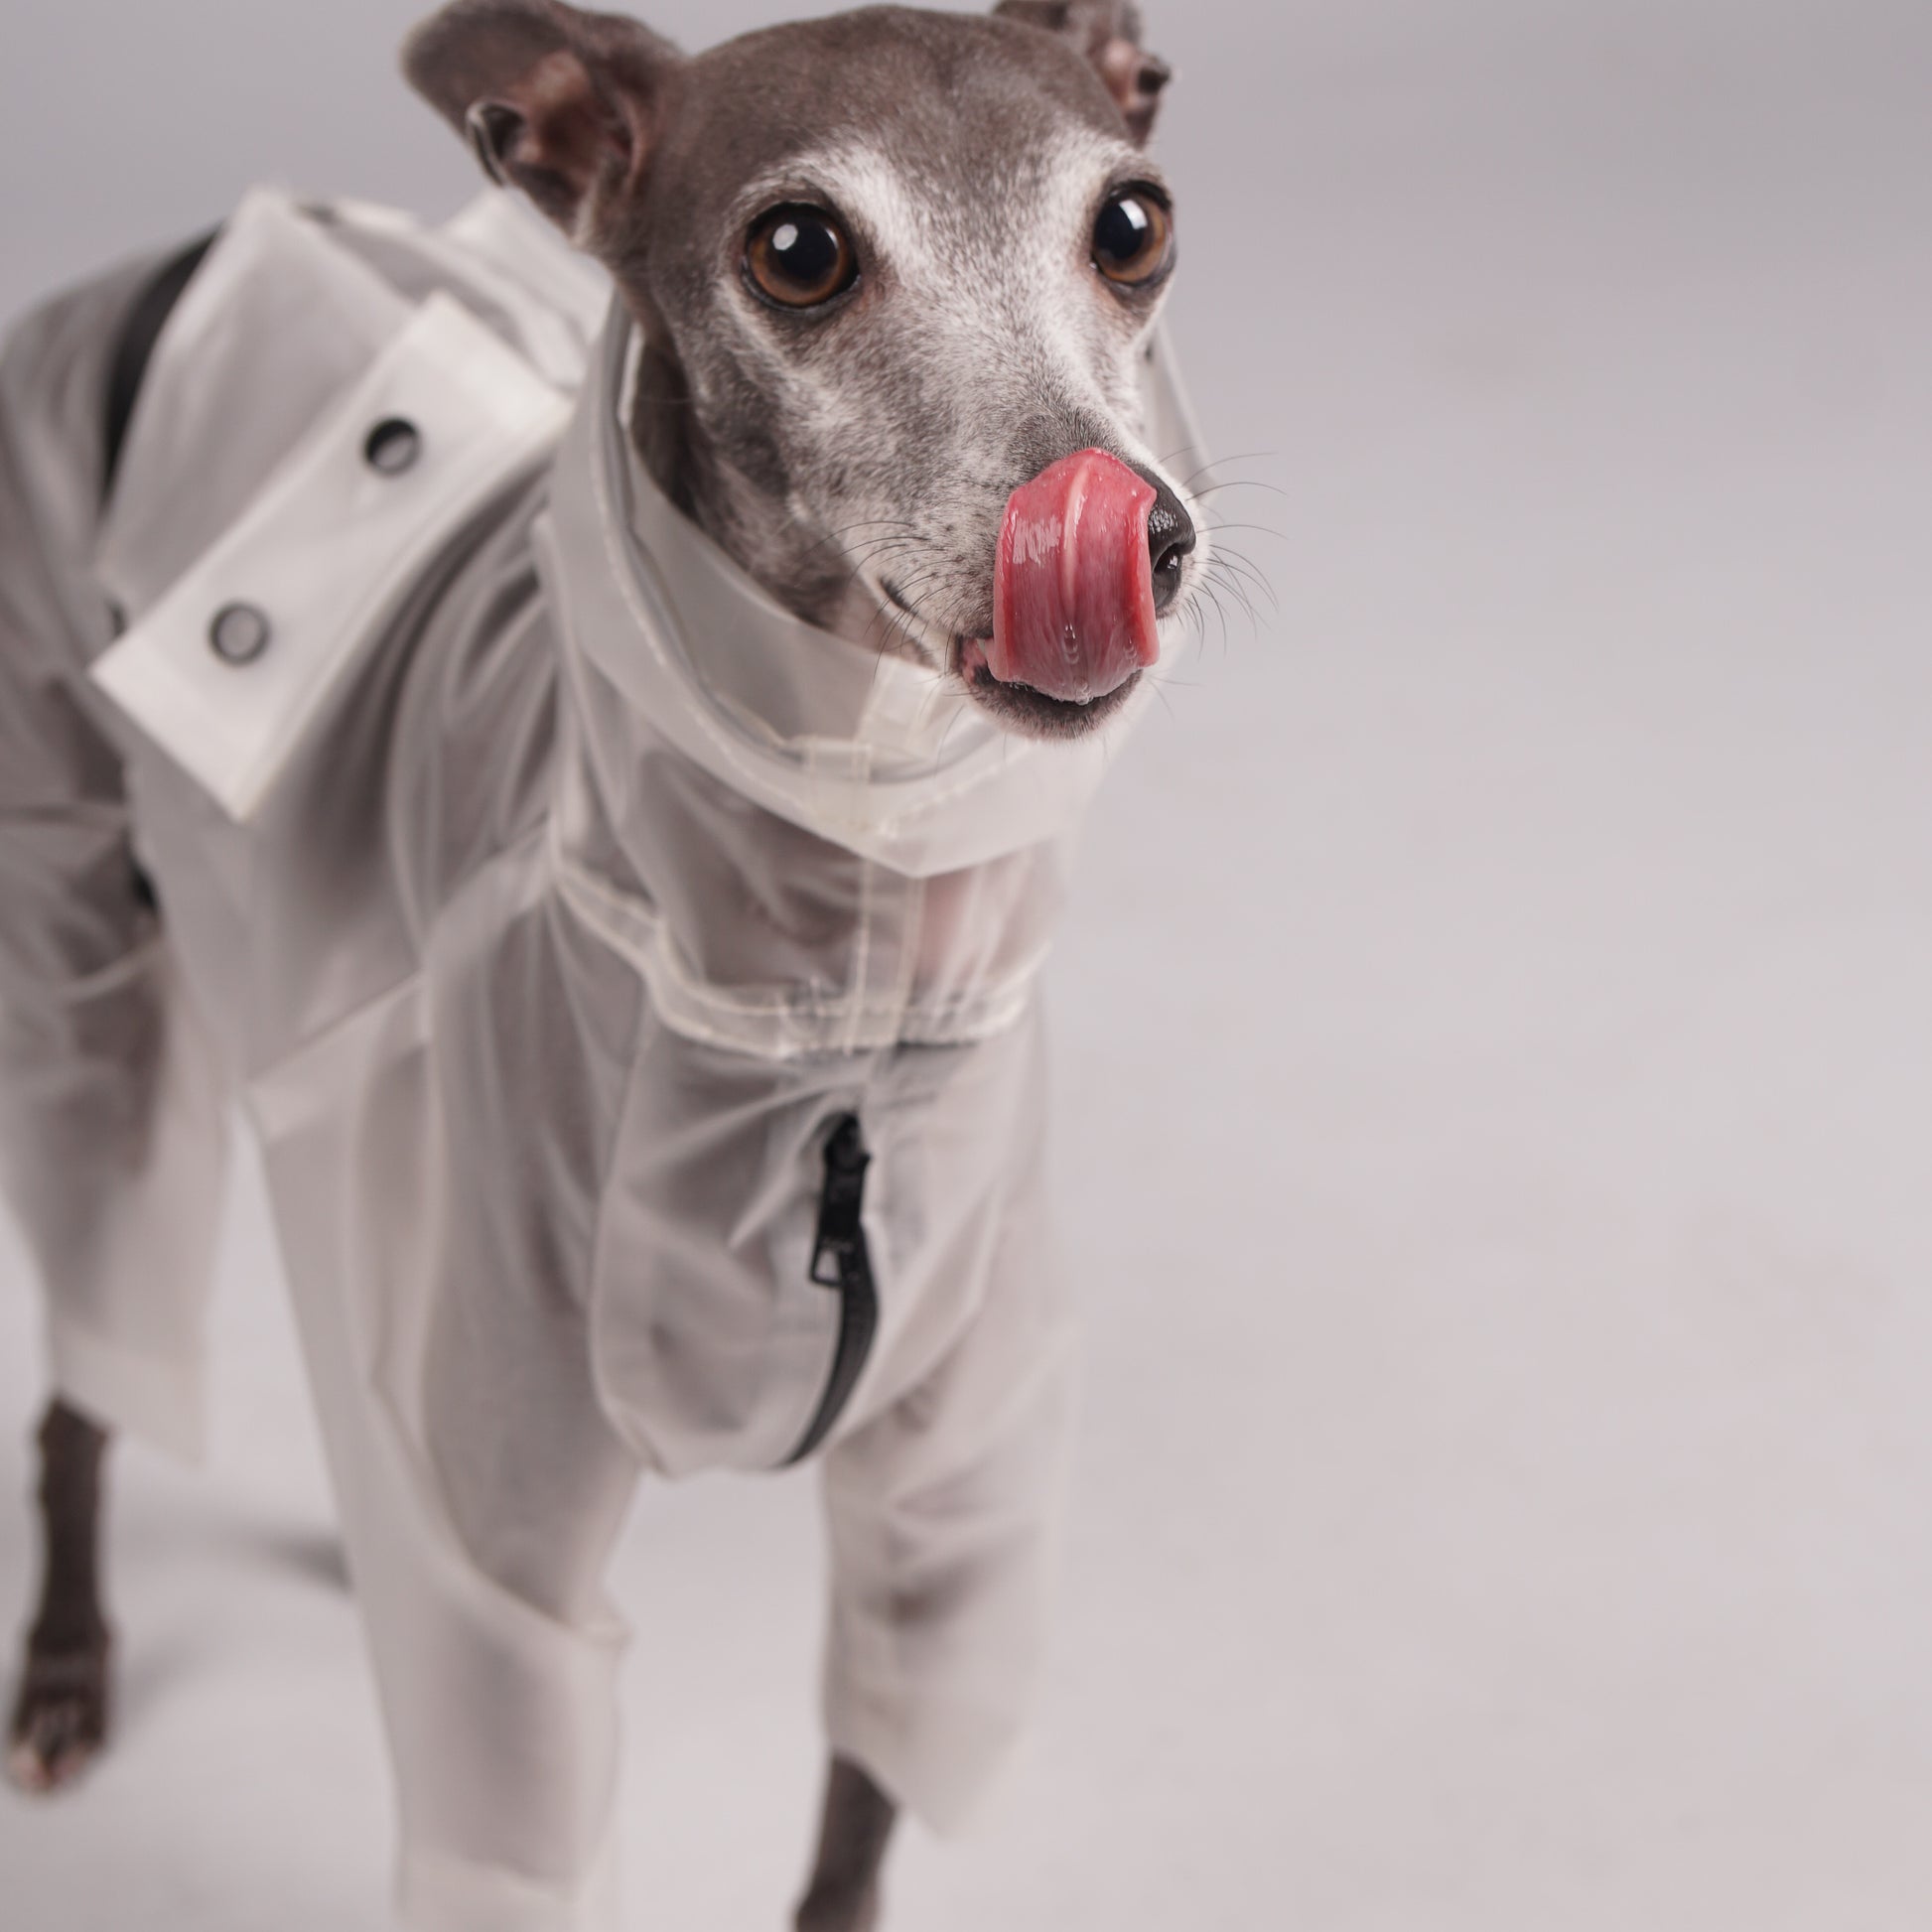 Raincoat for dogs. Luxury clothing for Italian Greyhounds and Whippets.